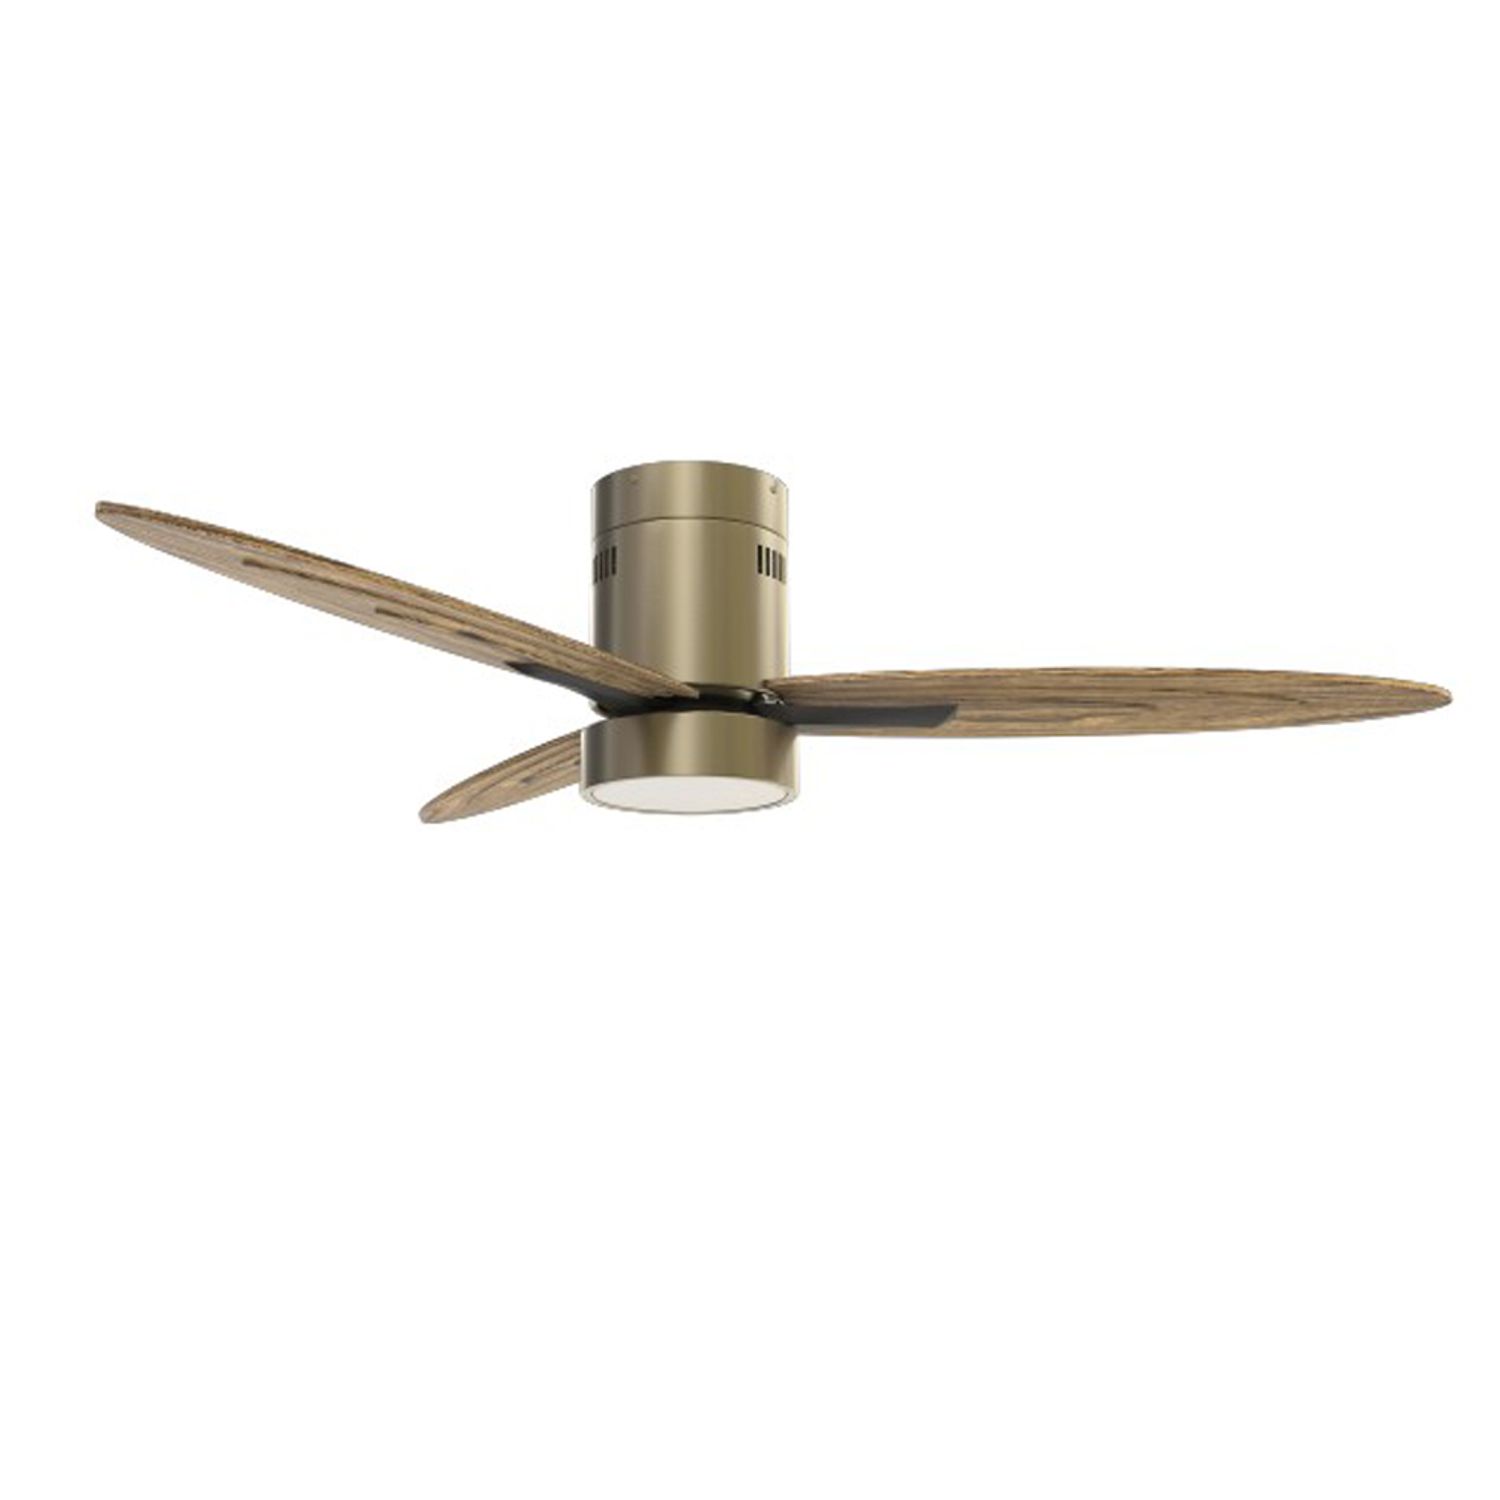 KBS wholesale brass and Wooden Design Ceiling Fan with Light, Reverse Function & Remote Control